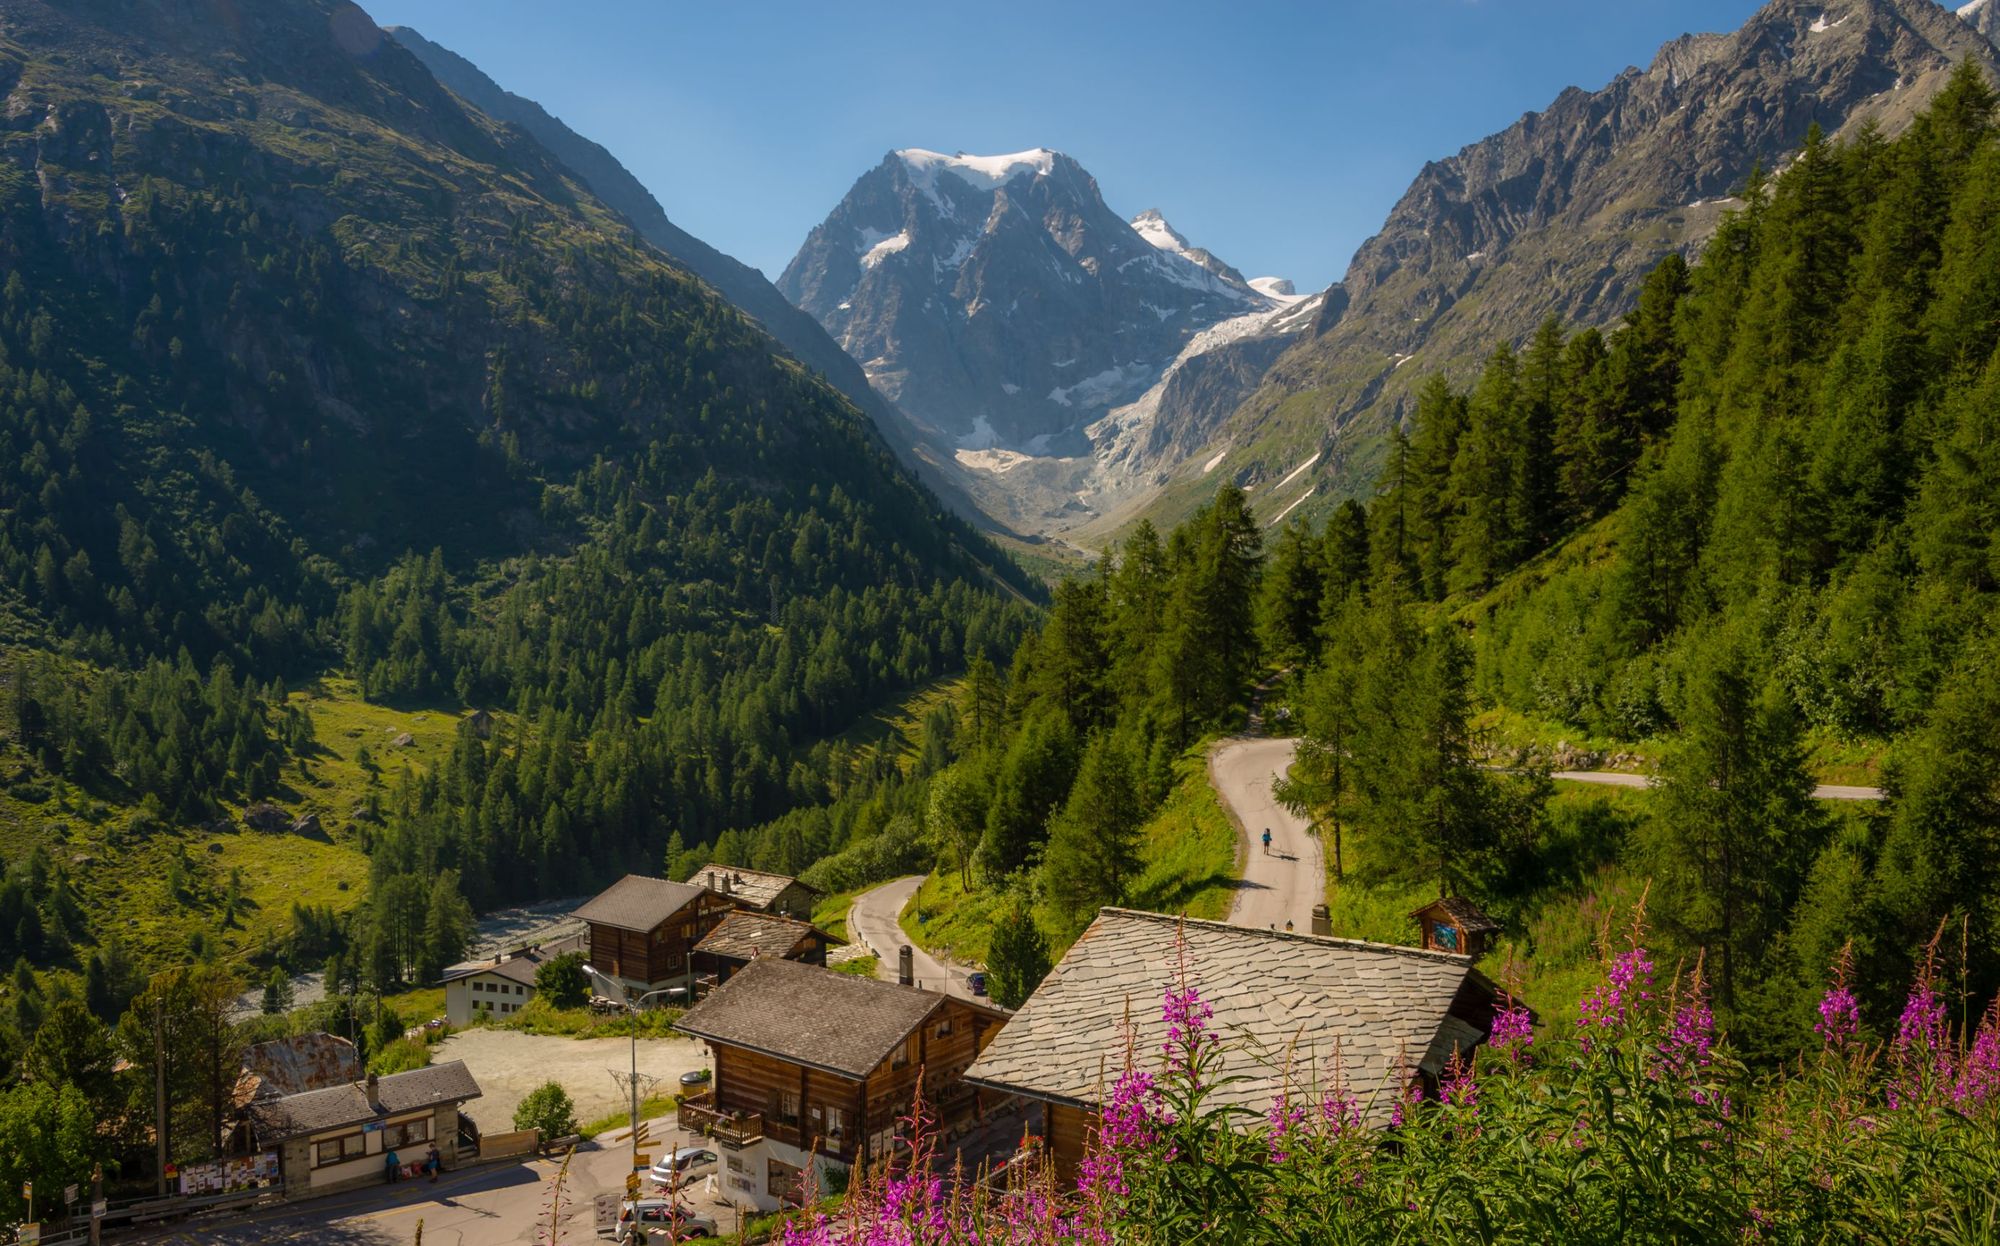 The town of Arolla, covered in green and backdropped by the snowy mountains. Photo: Getty